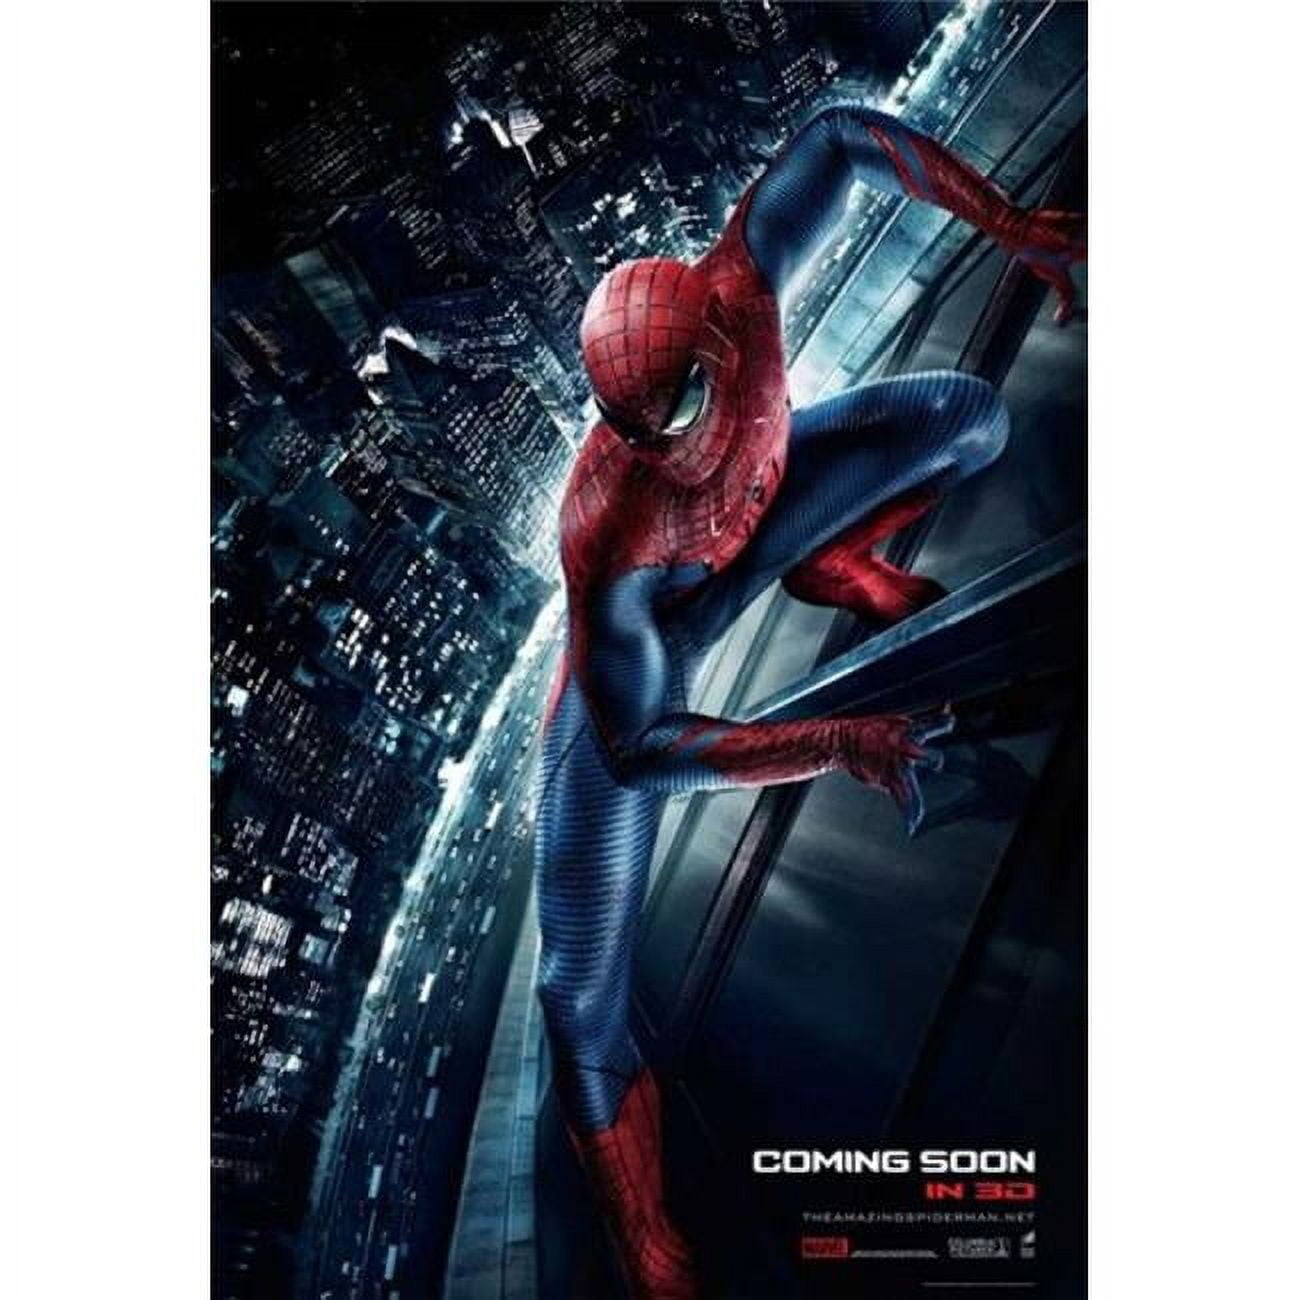 Spiderman Homecoming movie poster (d) - Spiderman poster - 11 x 17 inches